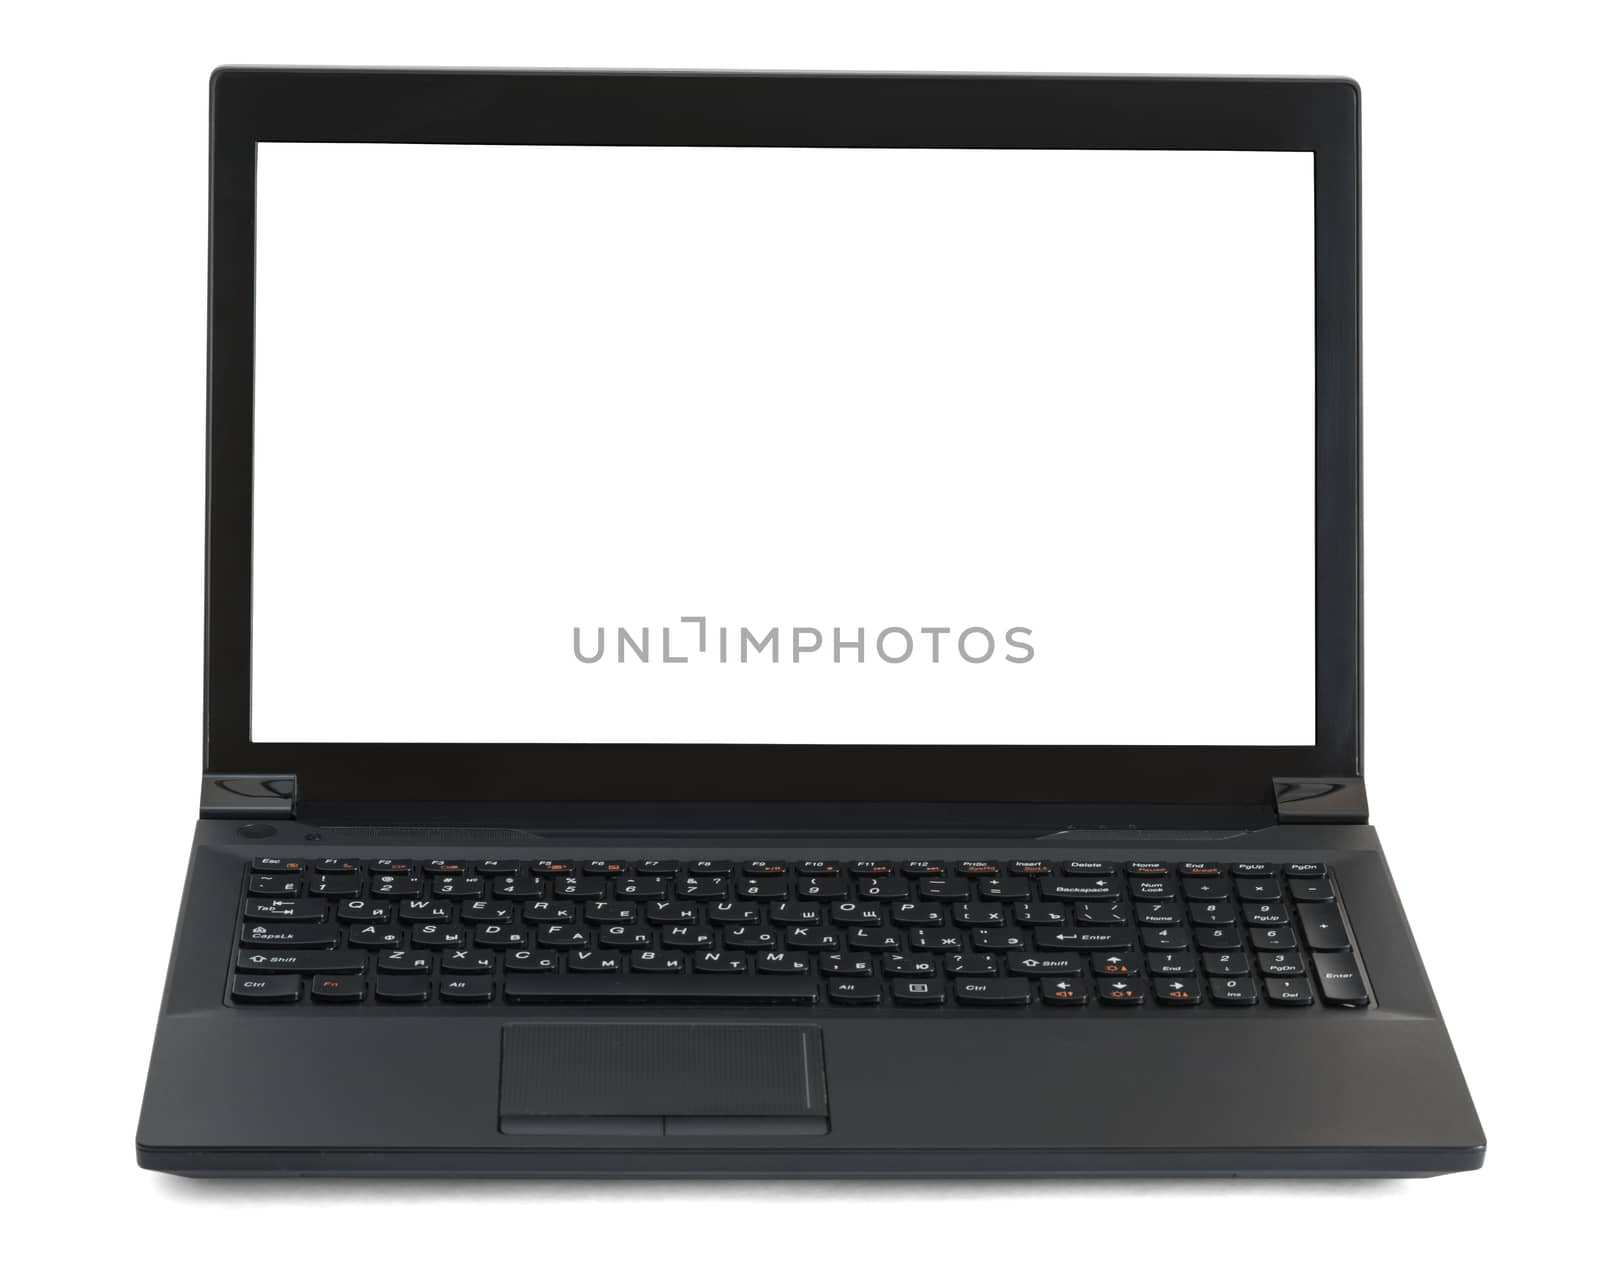 Laptop on isolated white background, front view